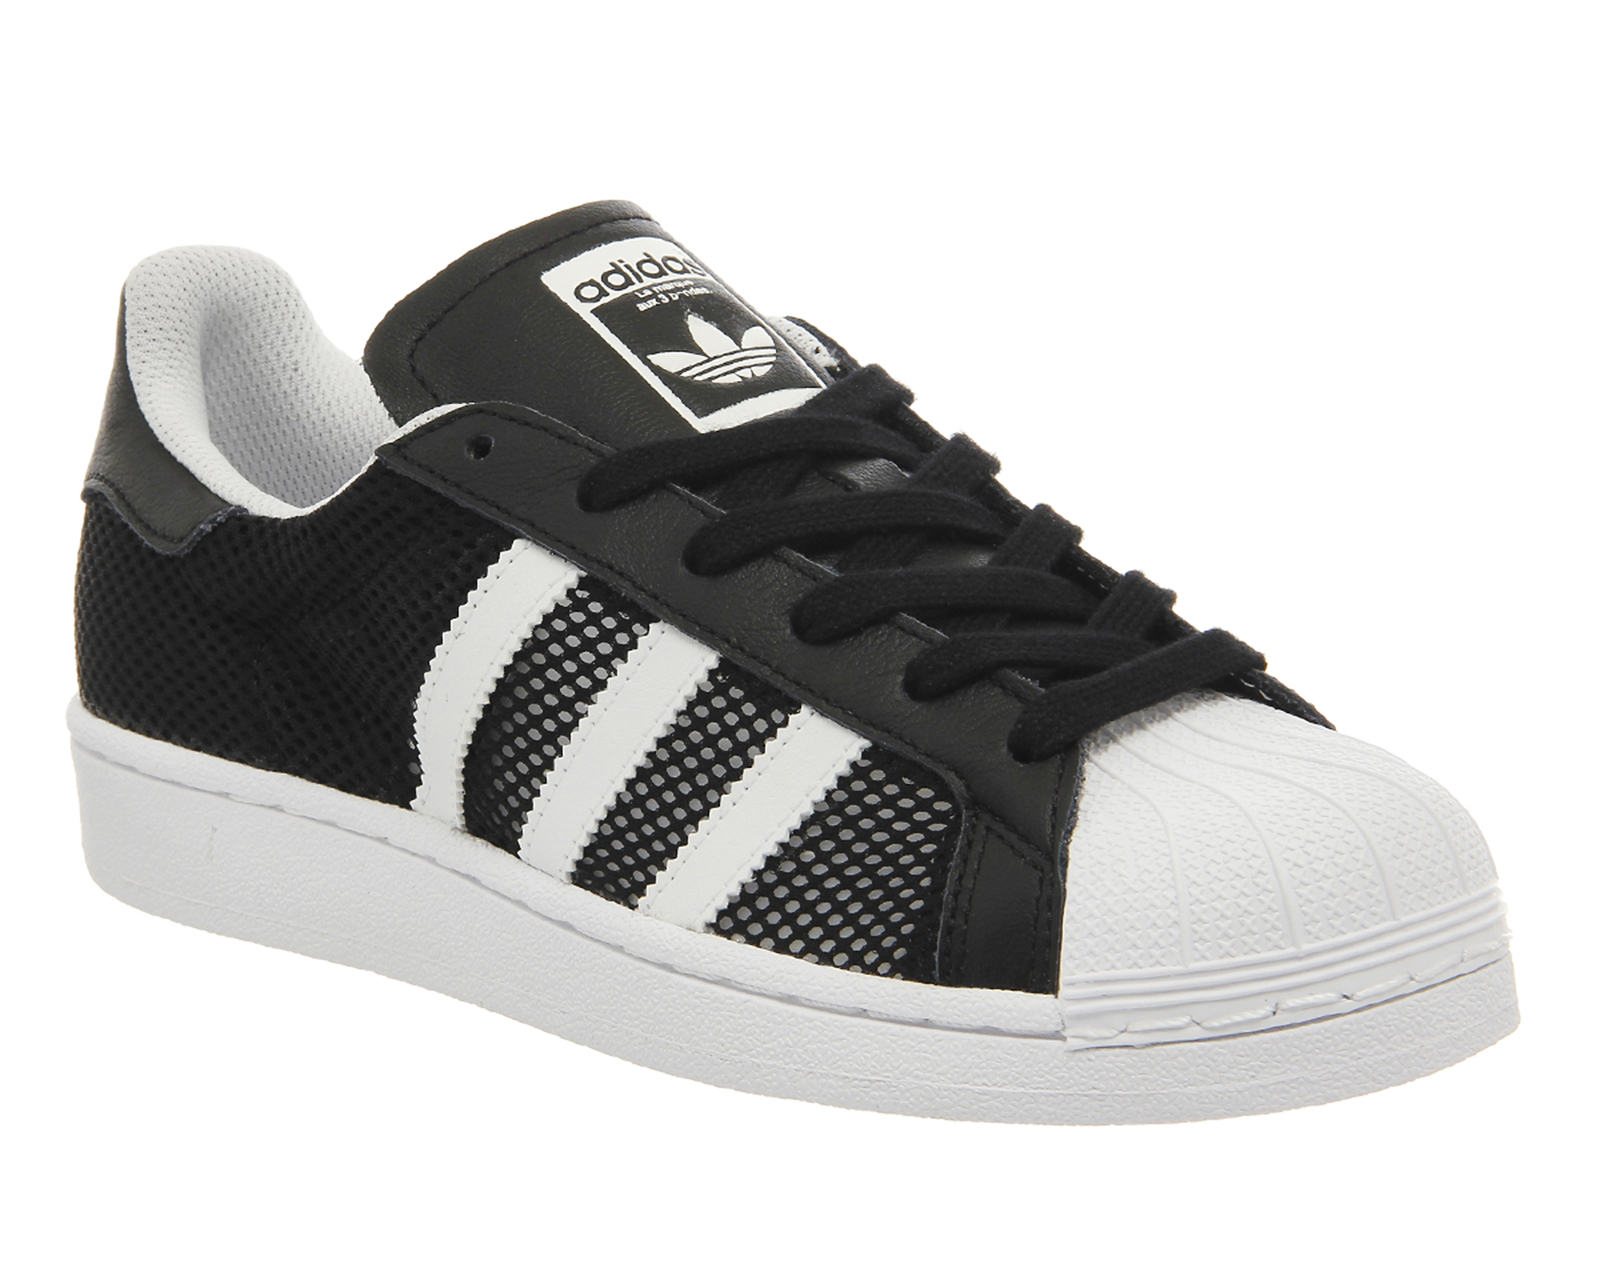 adidas Superstar 1 Black White Mesh Exclusive - His trainers